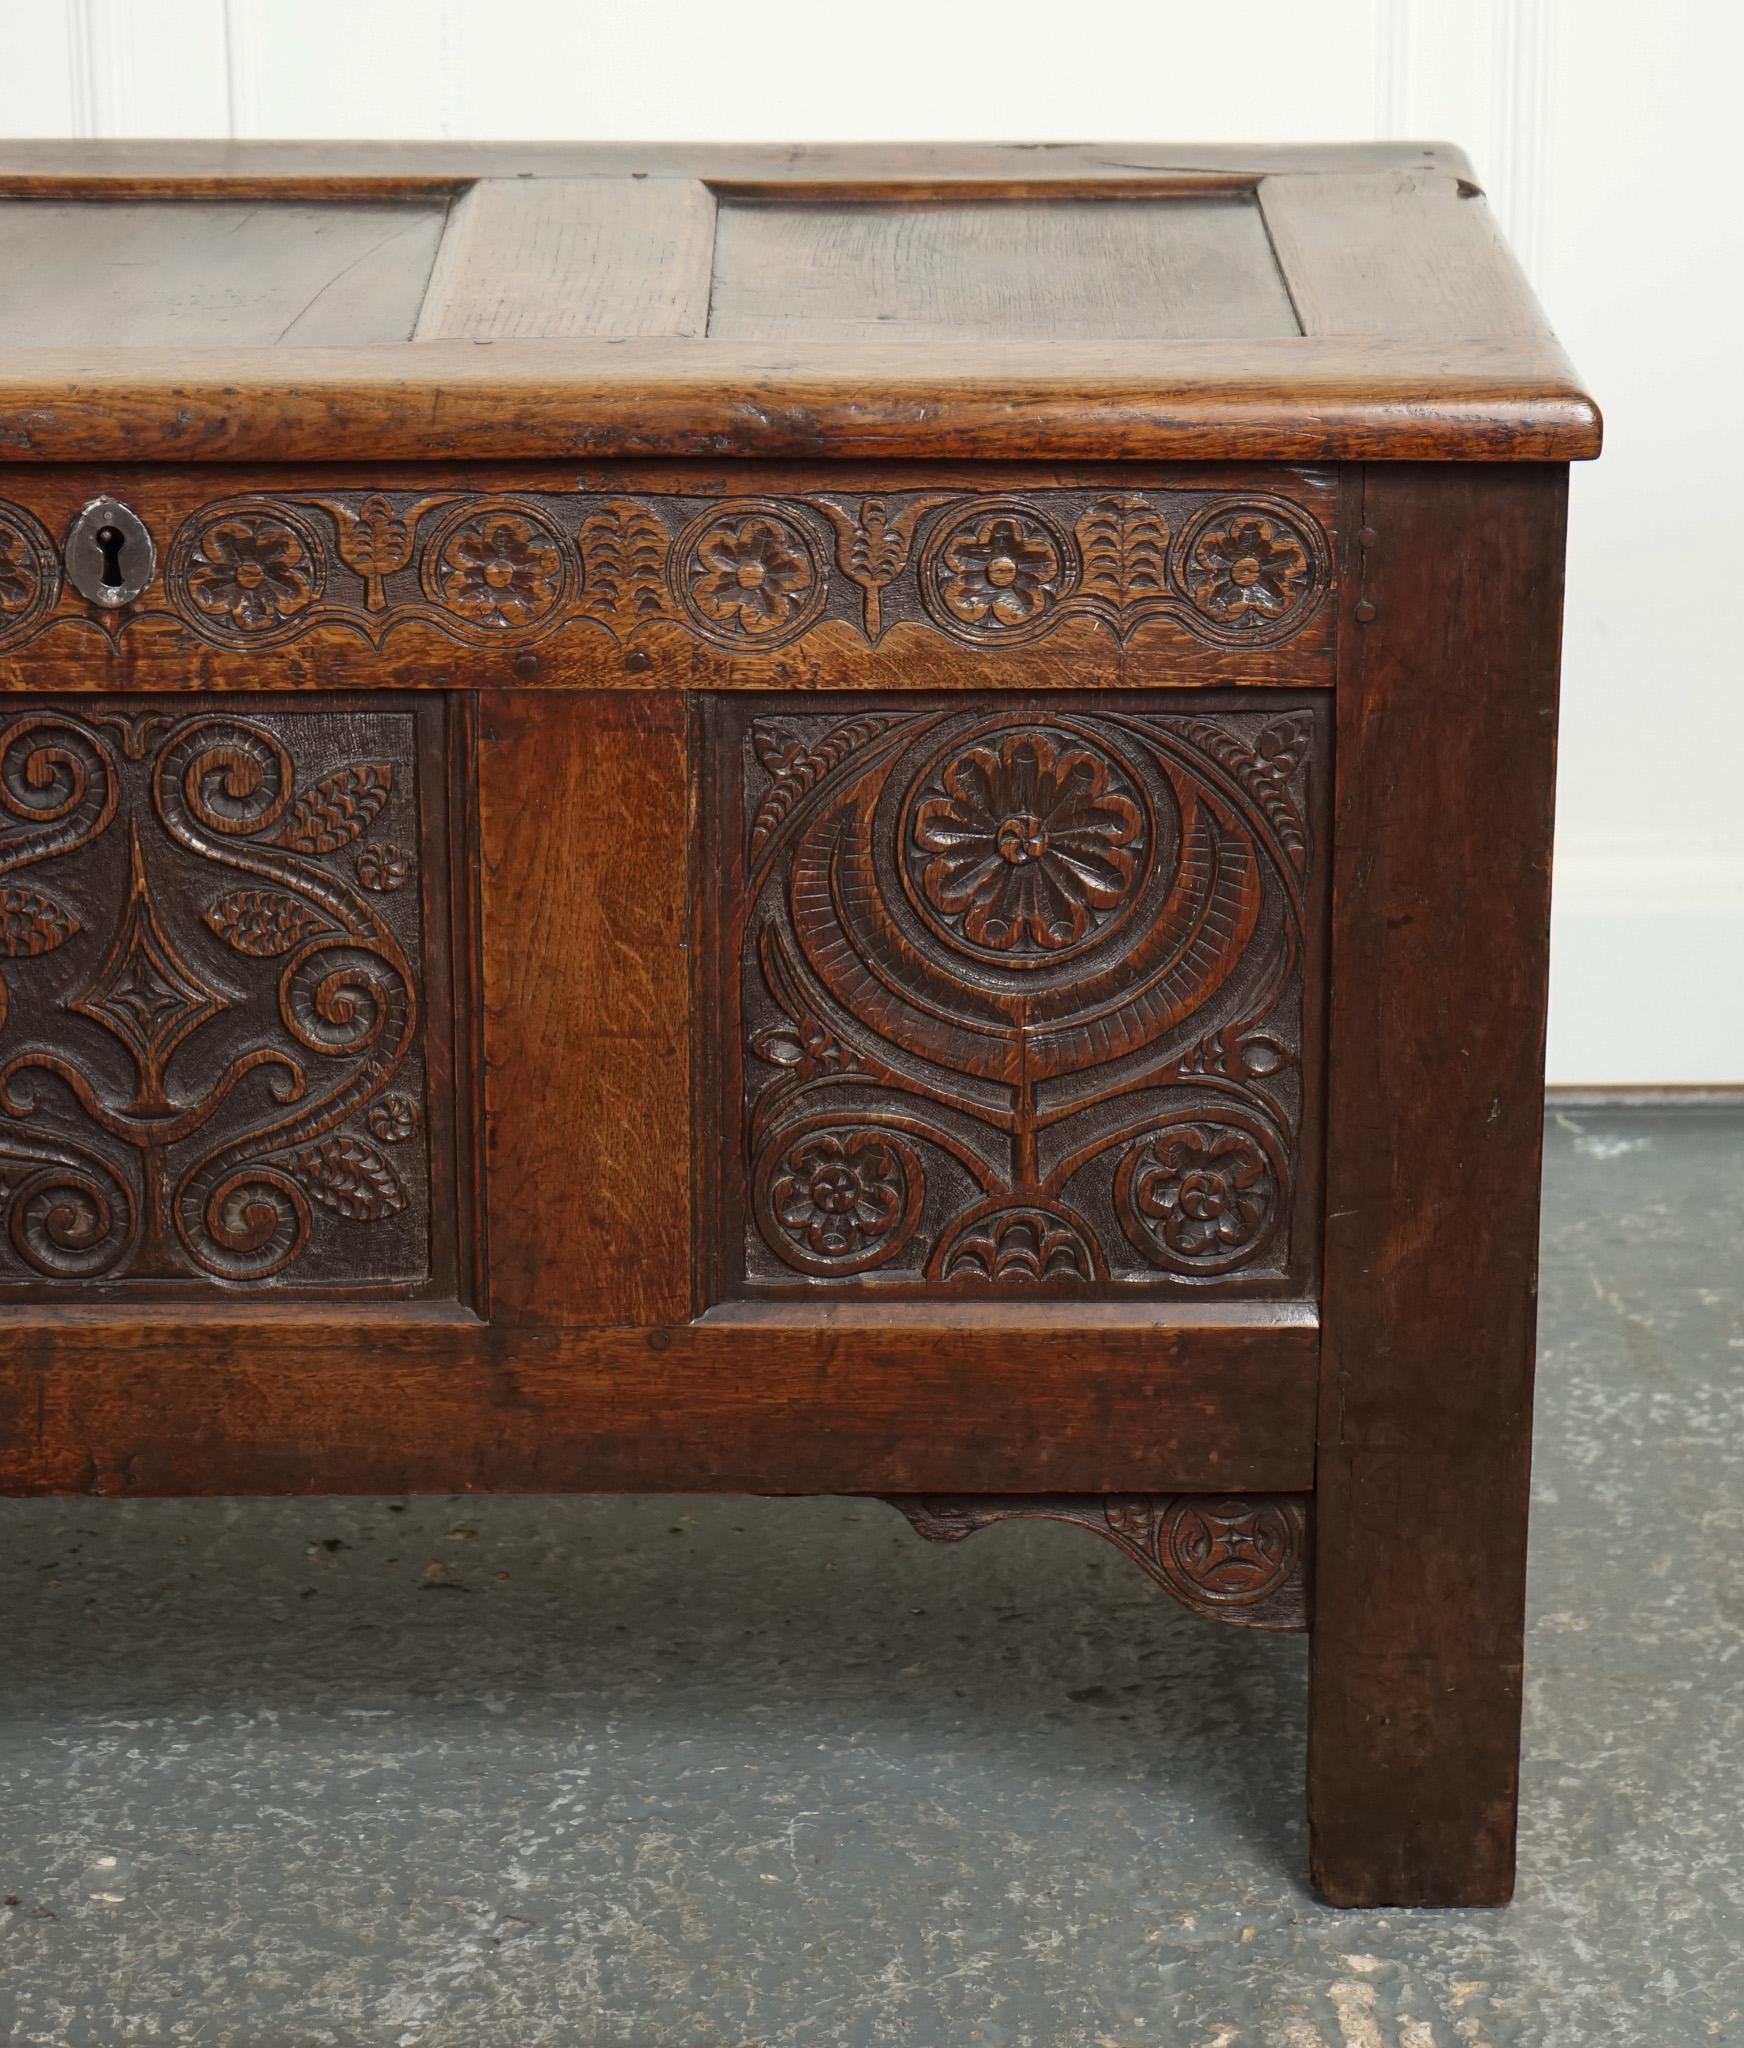 LOVELY 17TH CENTURY CARVED ANTIQUE OAK TRUNK CHEST COFFER j1 For Sale 4